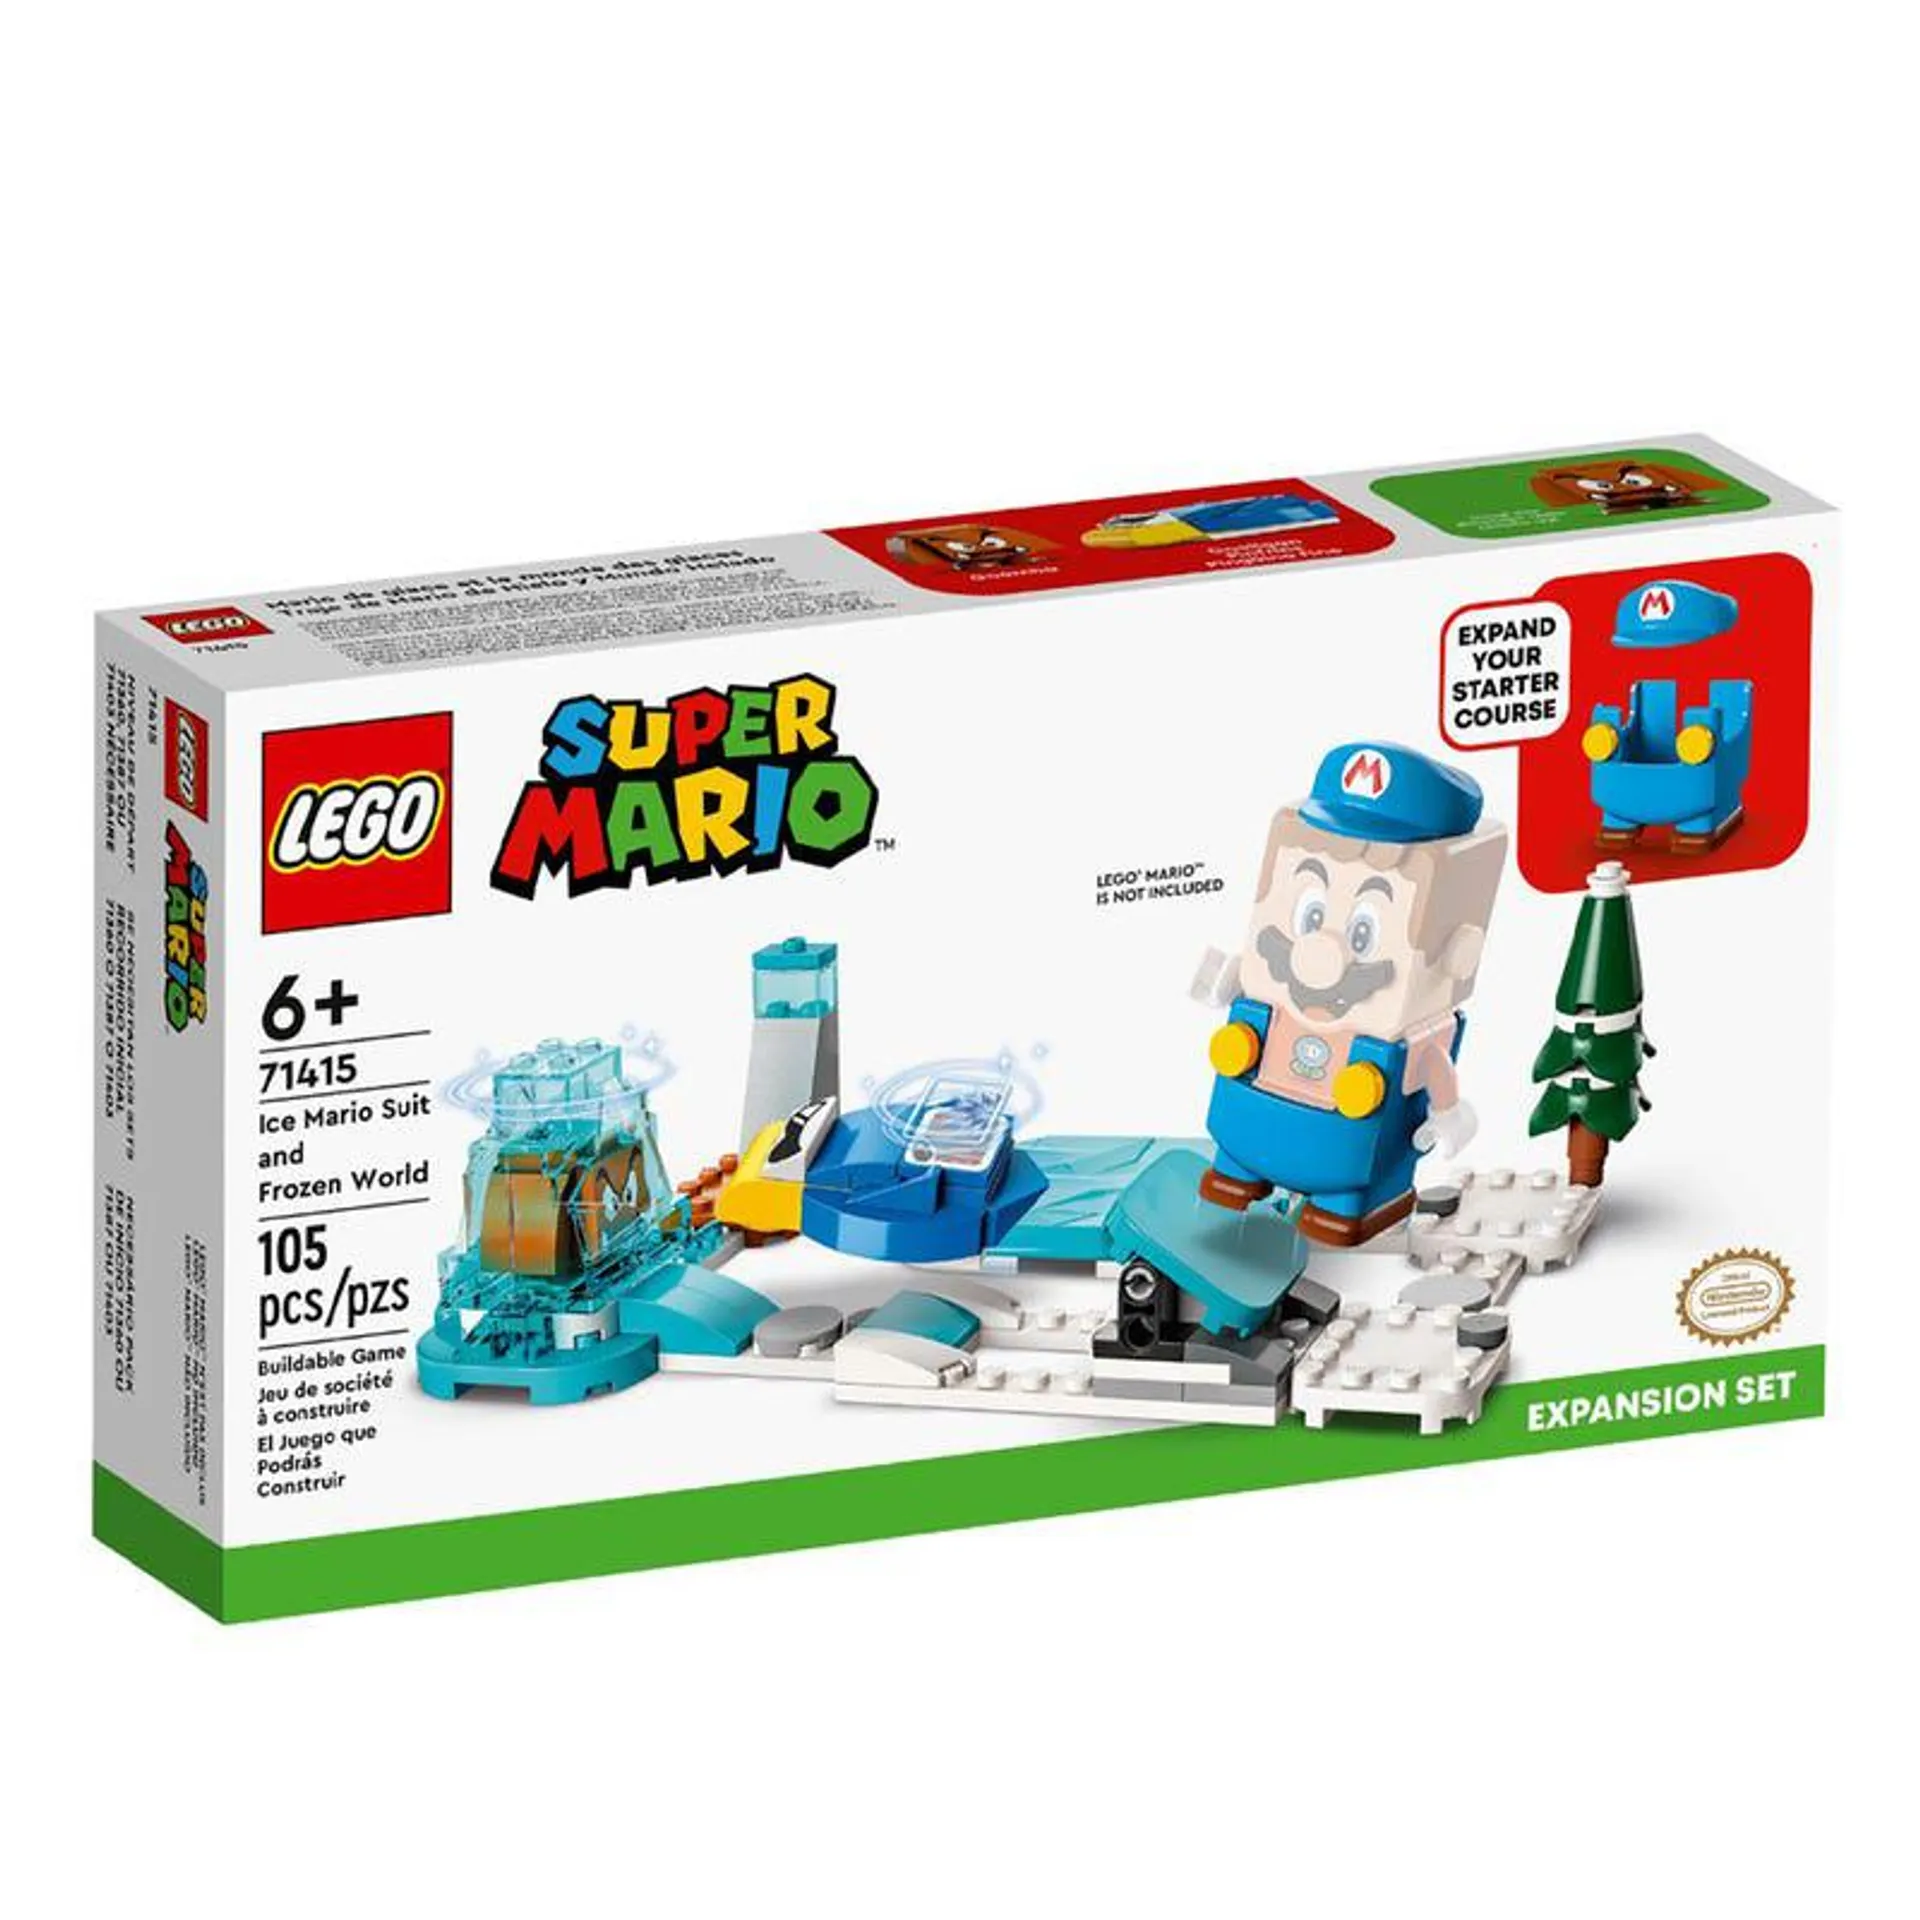 Lego Ice Mario Suit And Frozen World